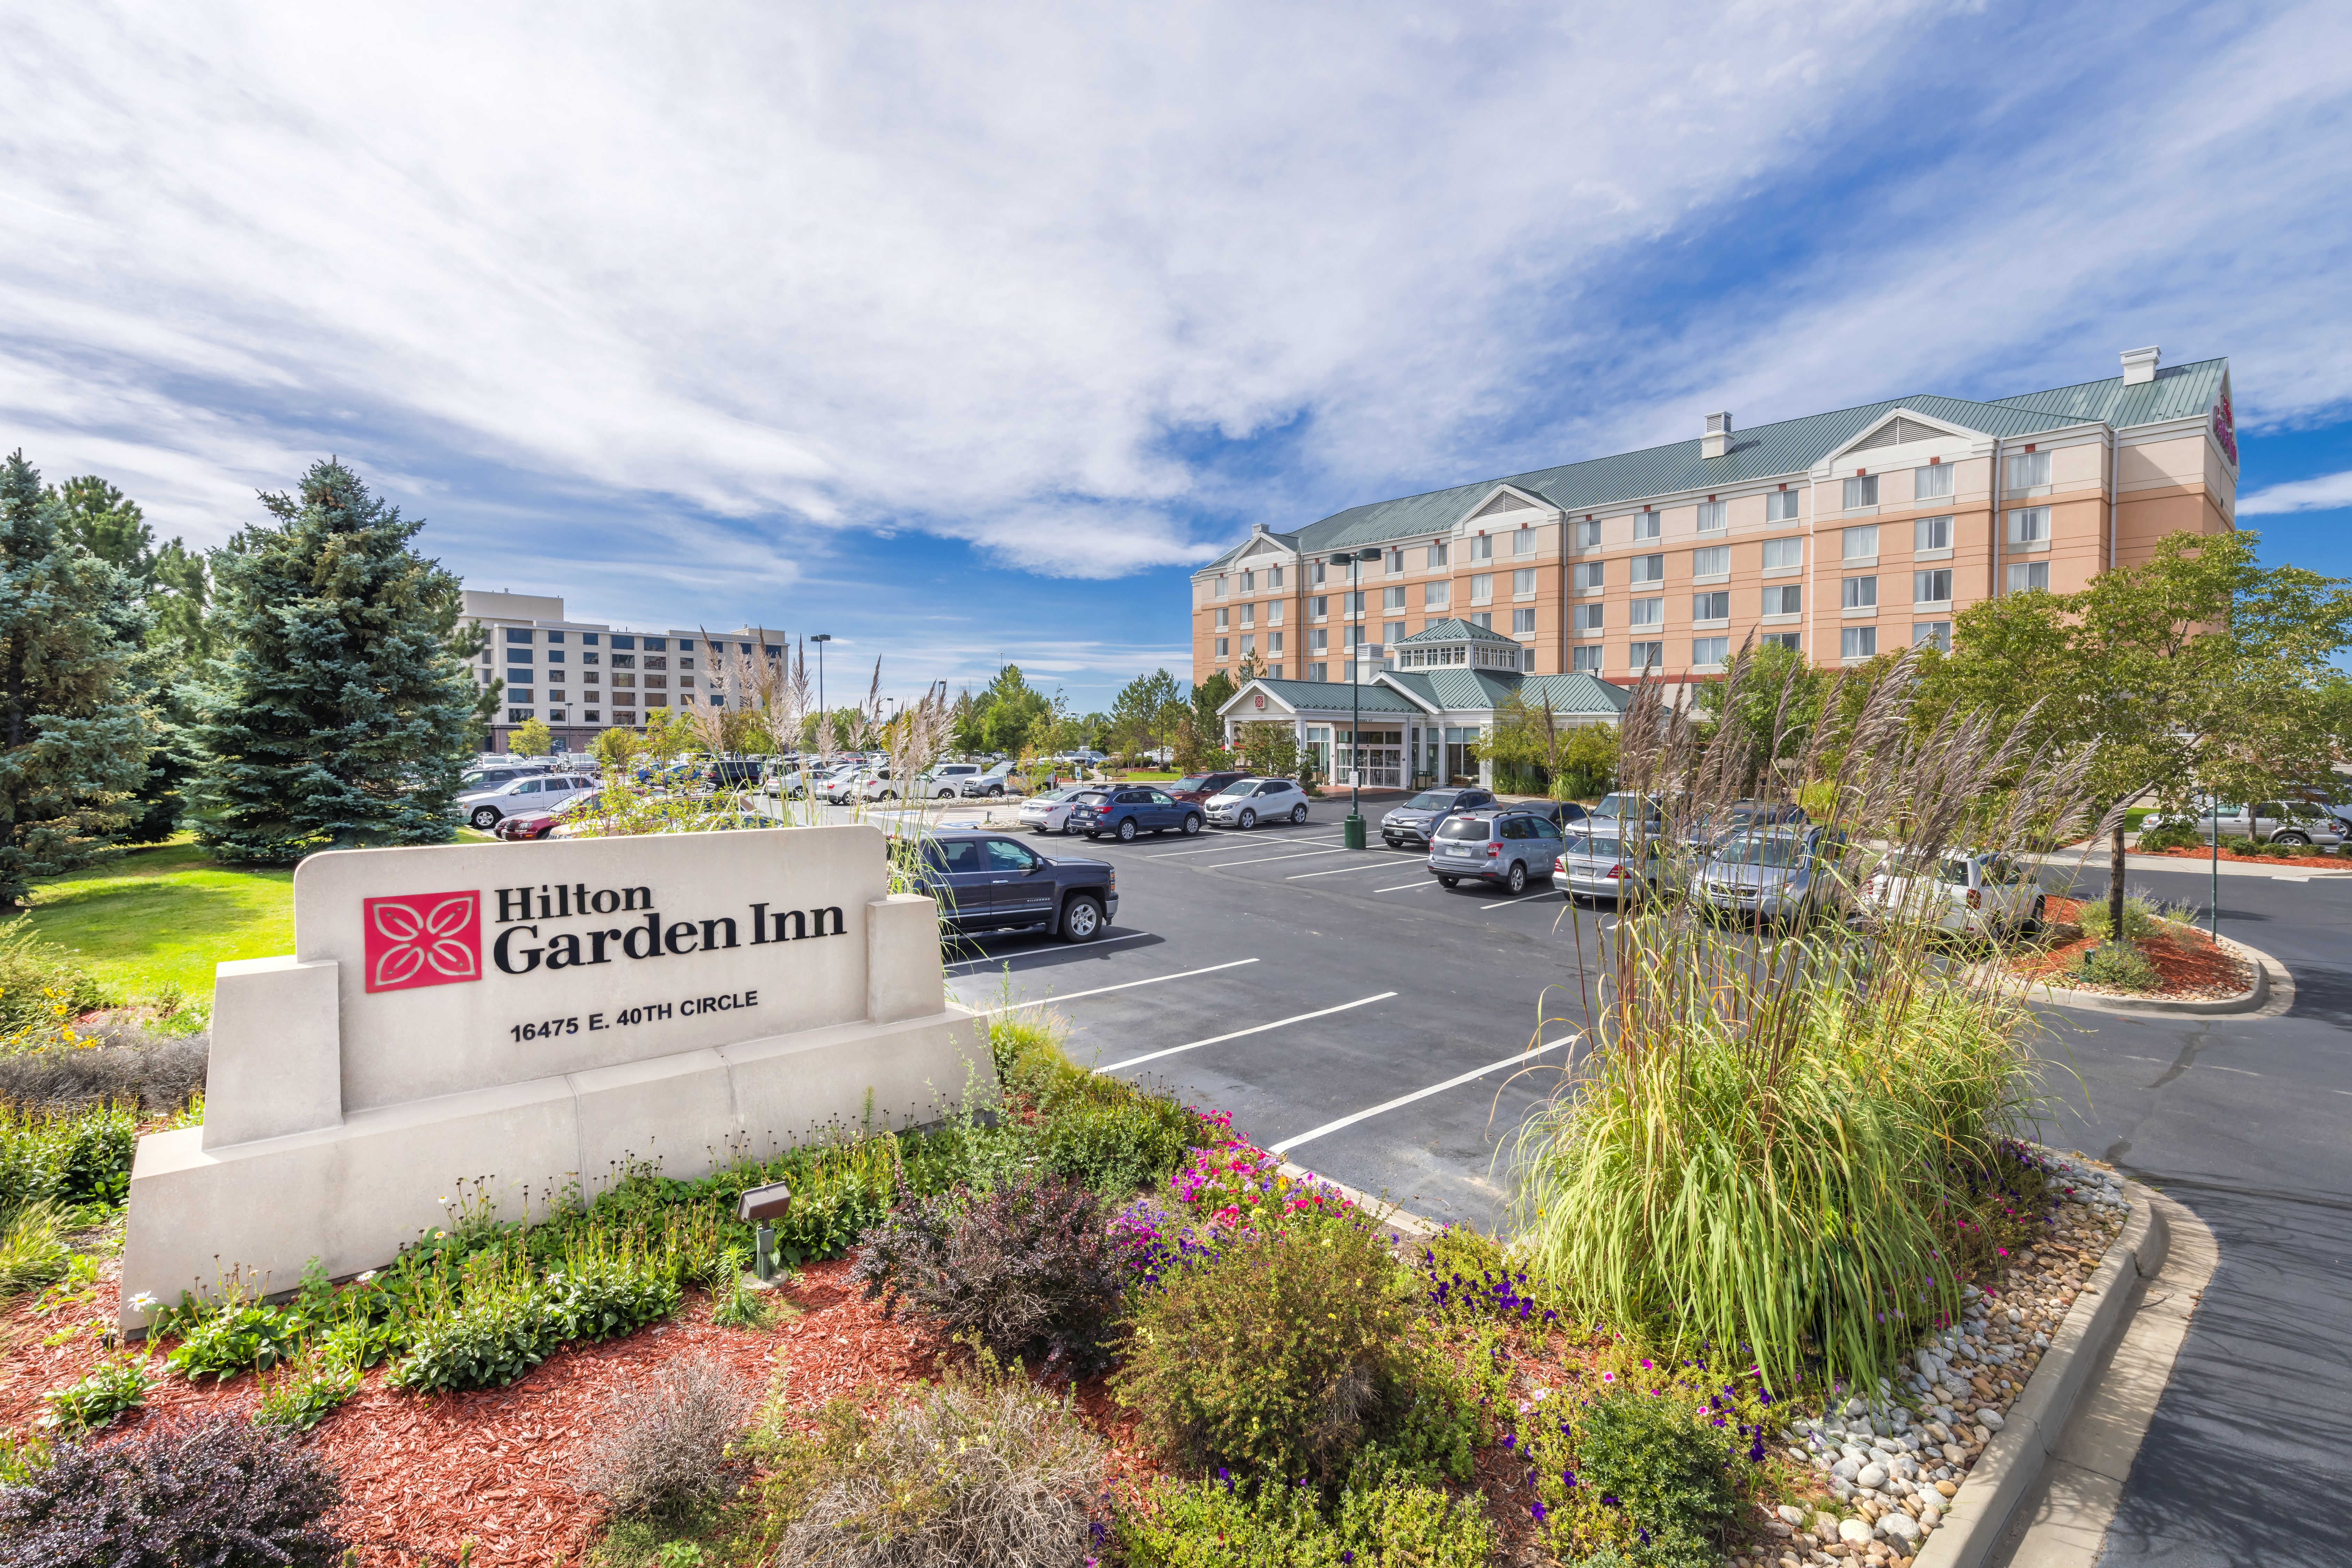 Daytime View of Hotel Exterior, Hilton Garden Inn Sign and Parking